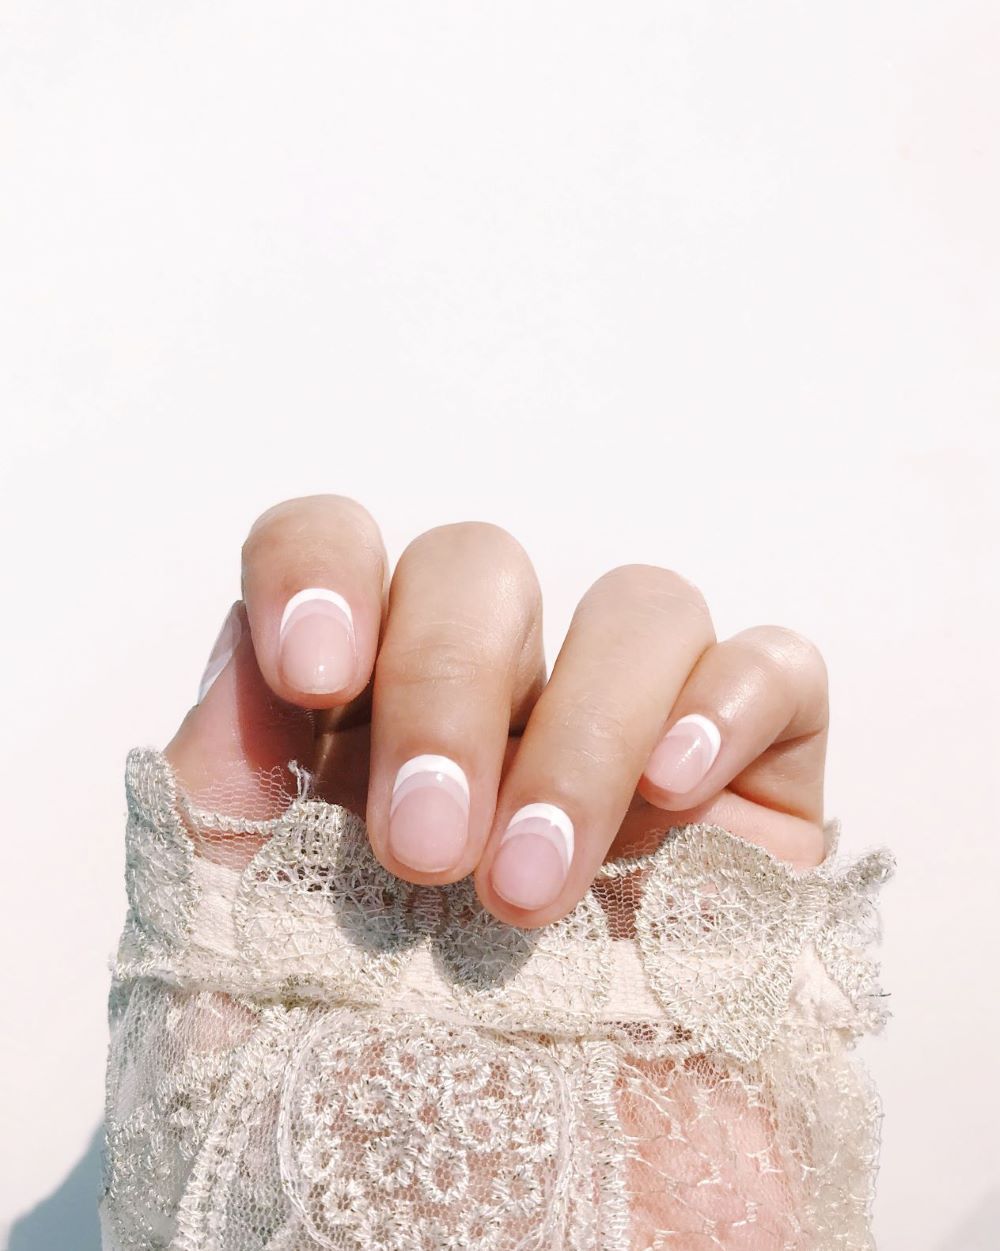 What Does It Mean if a Girl Paints Her Nails White? – ORLY